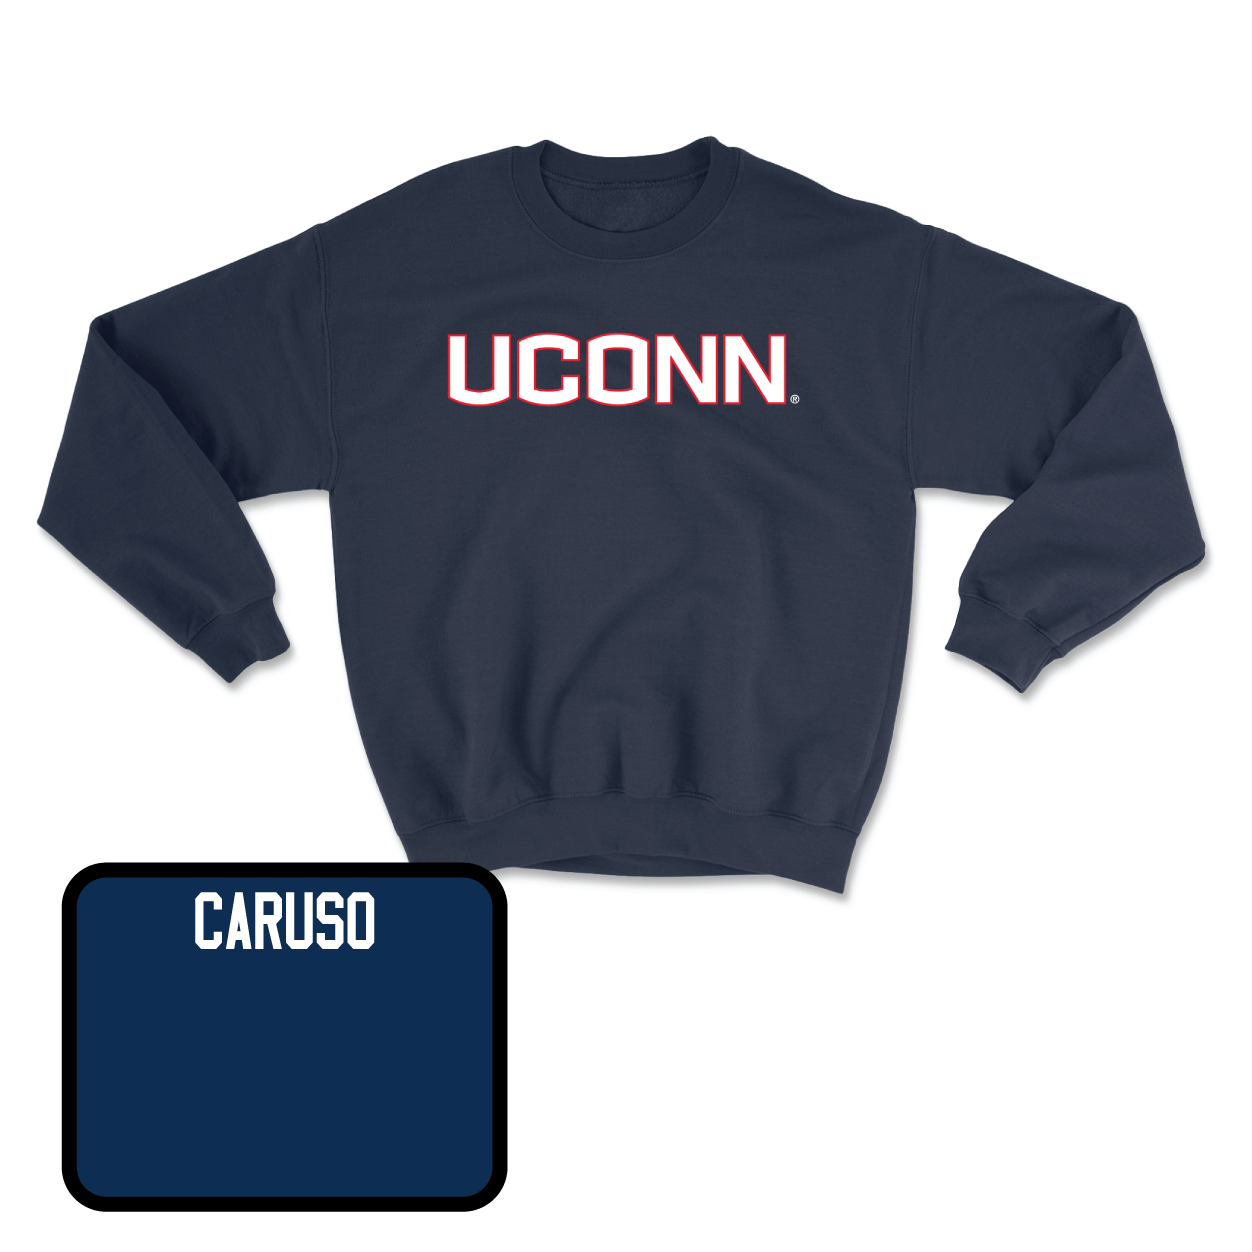 Navy Women's Rowing UConn Crewneck Small / Riley Caruso